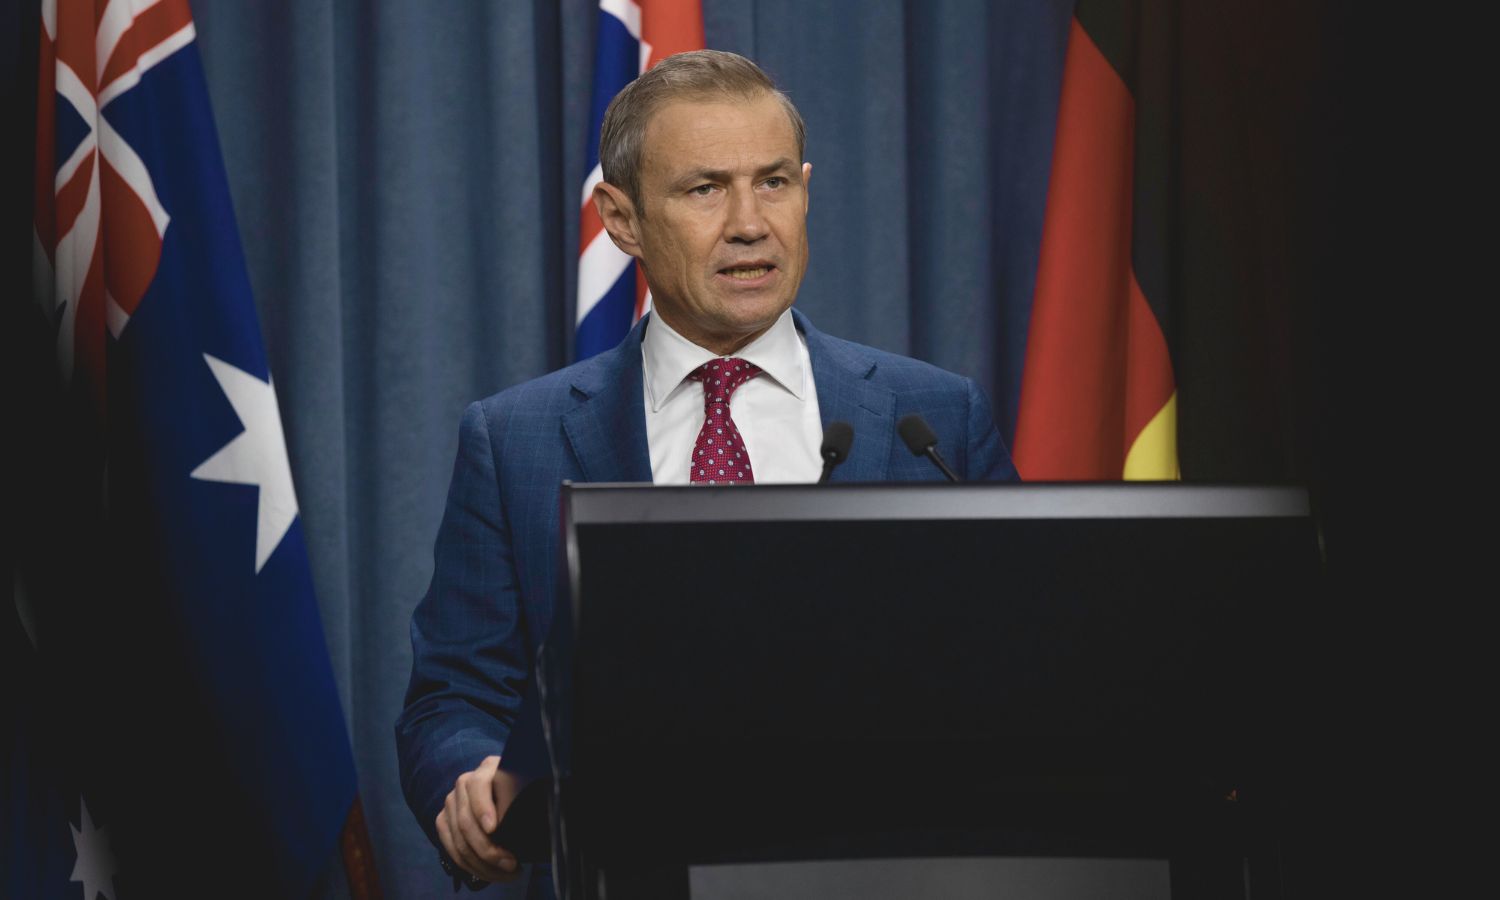 An image showing the new premier of WA, Roger Cook